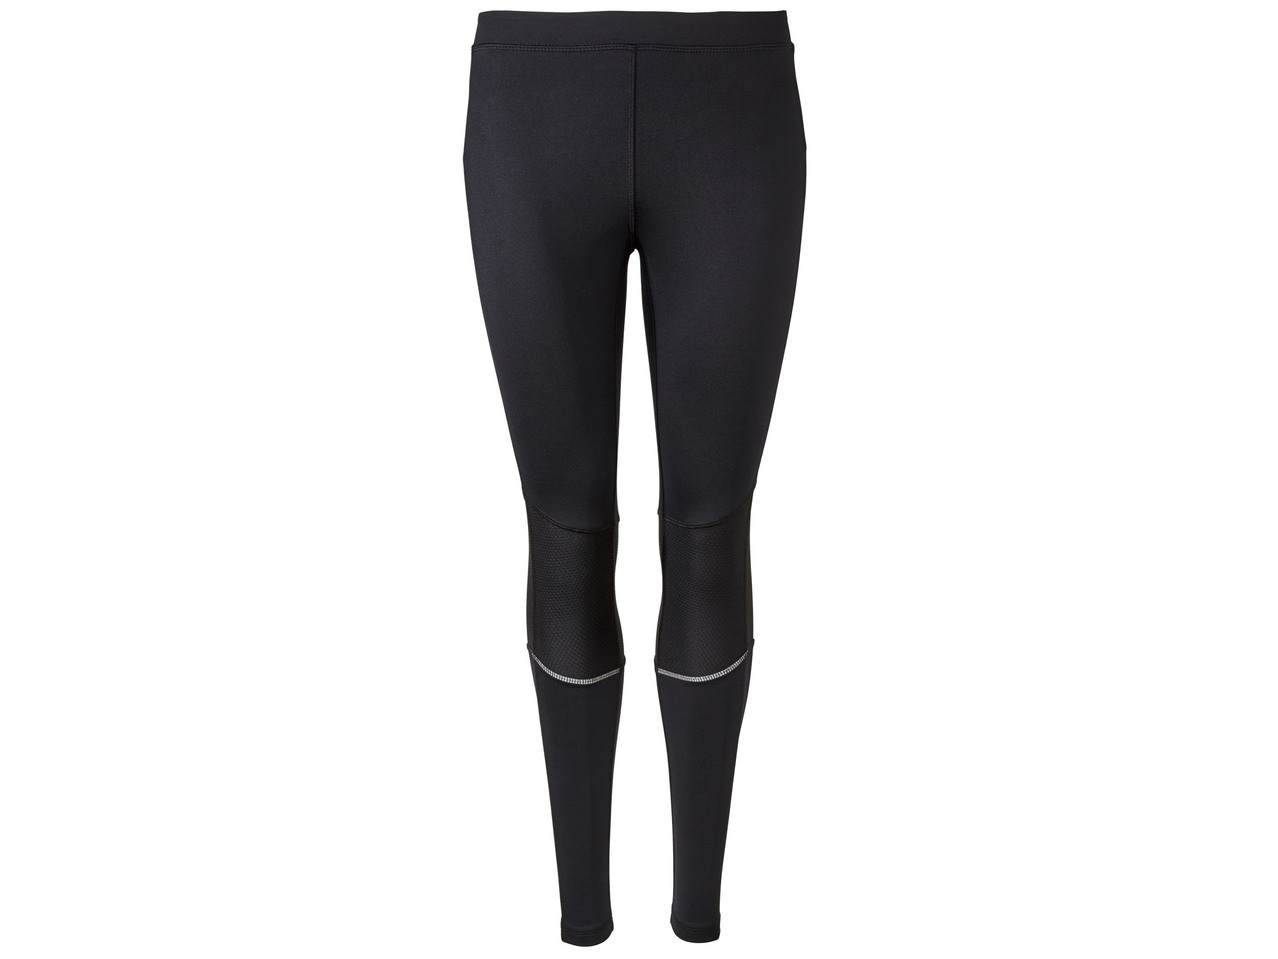 Ladies' Sports Trousers